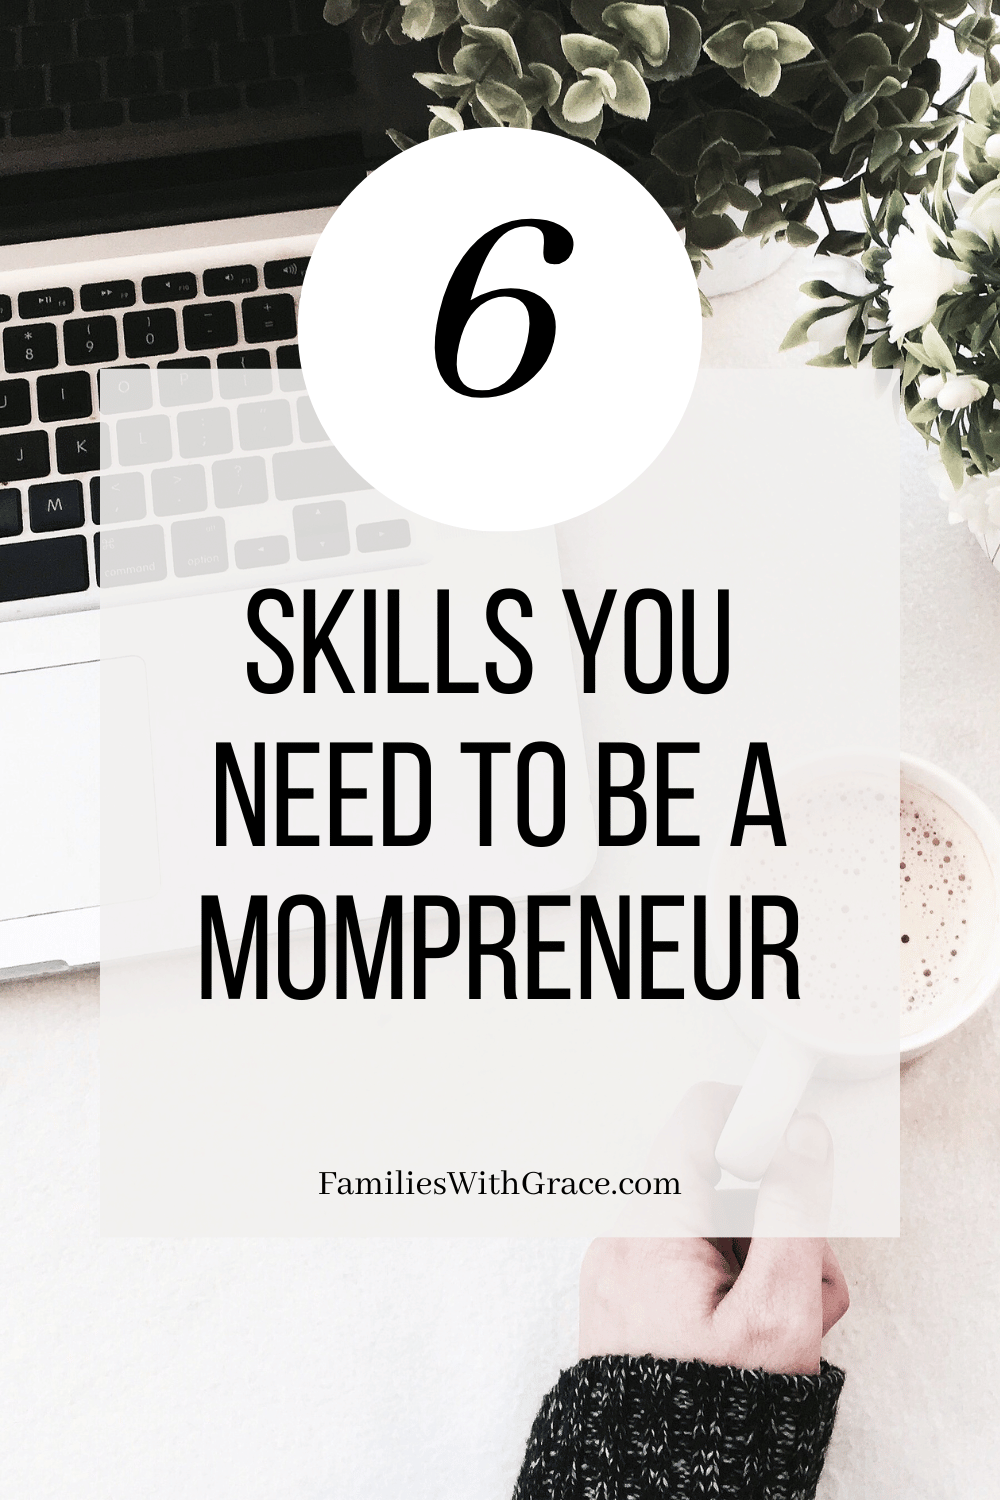 6 Skills you need to become a mompreneur